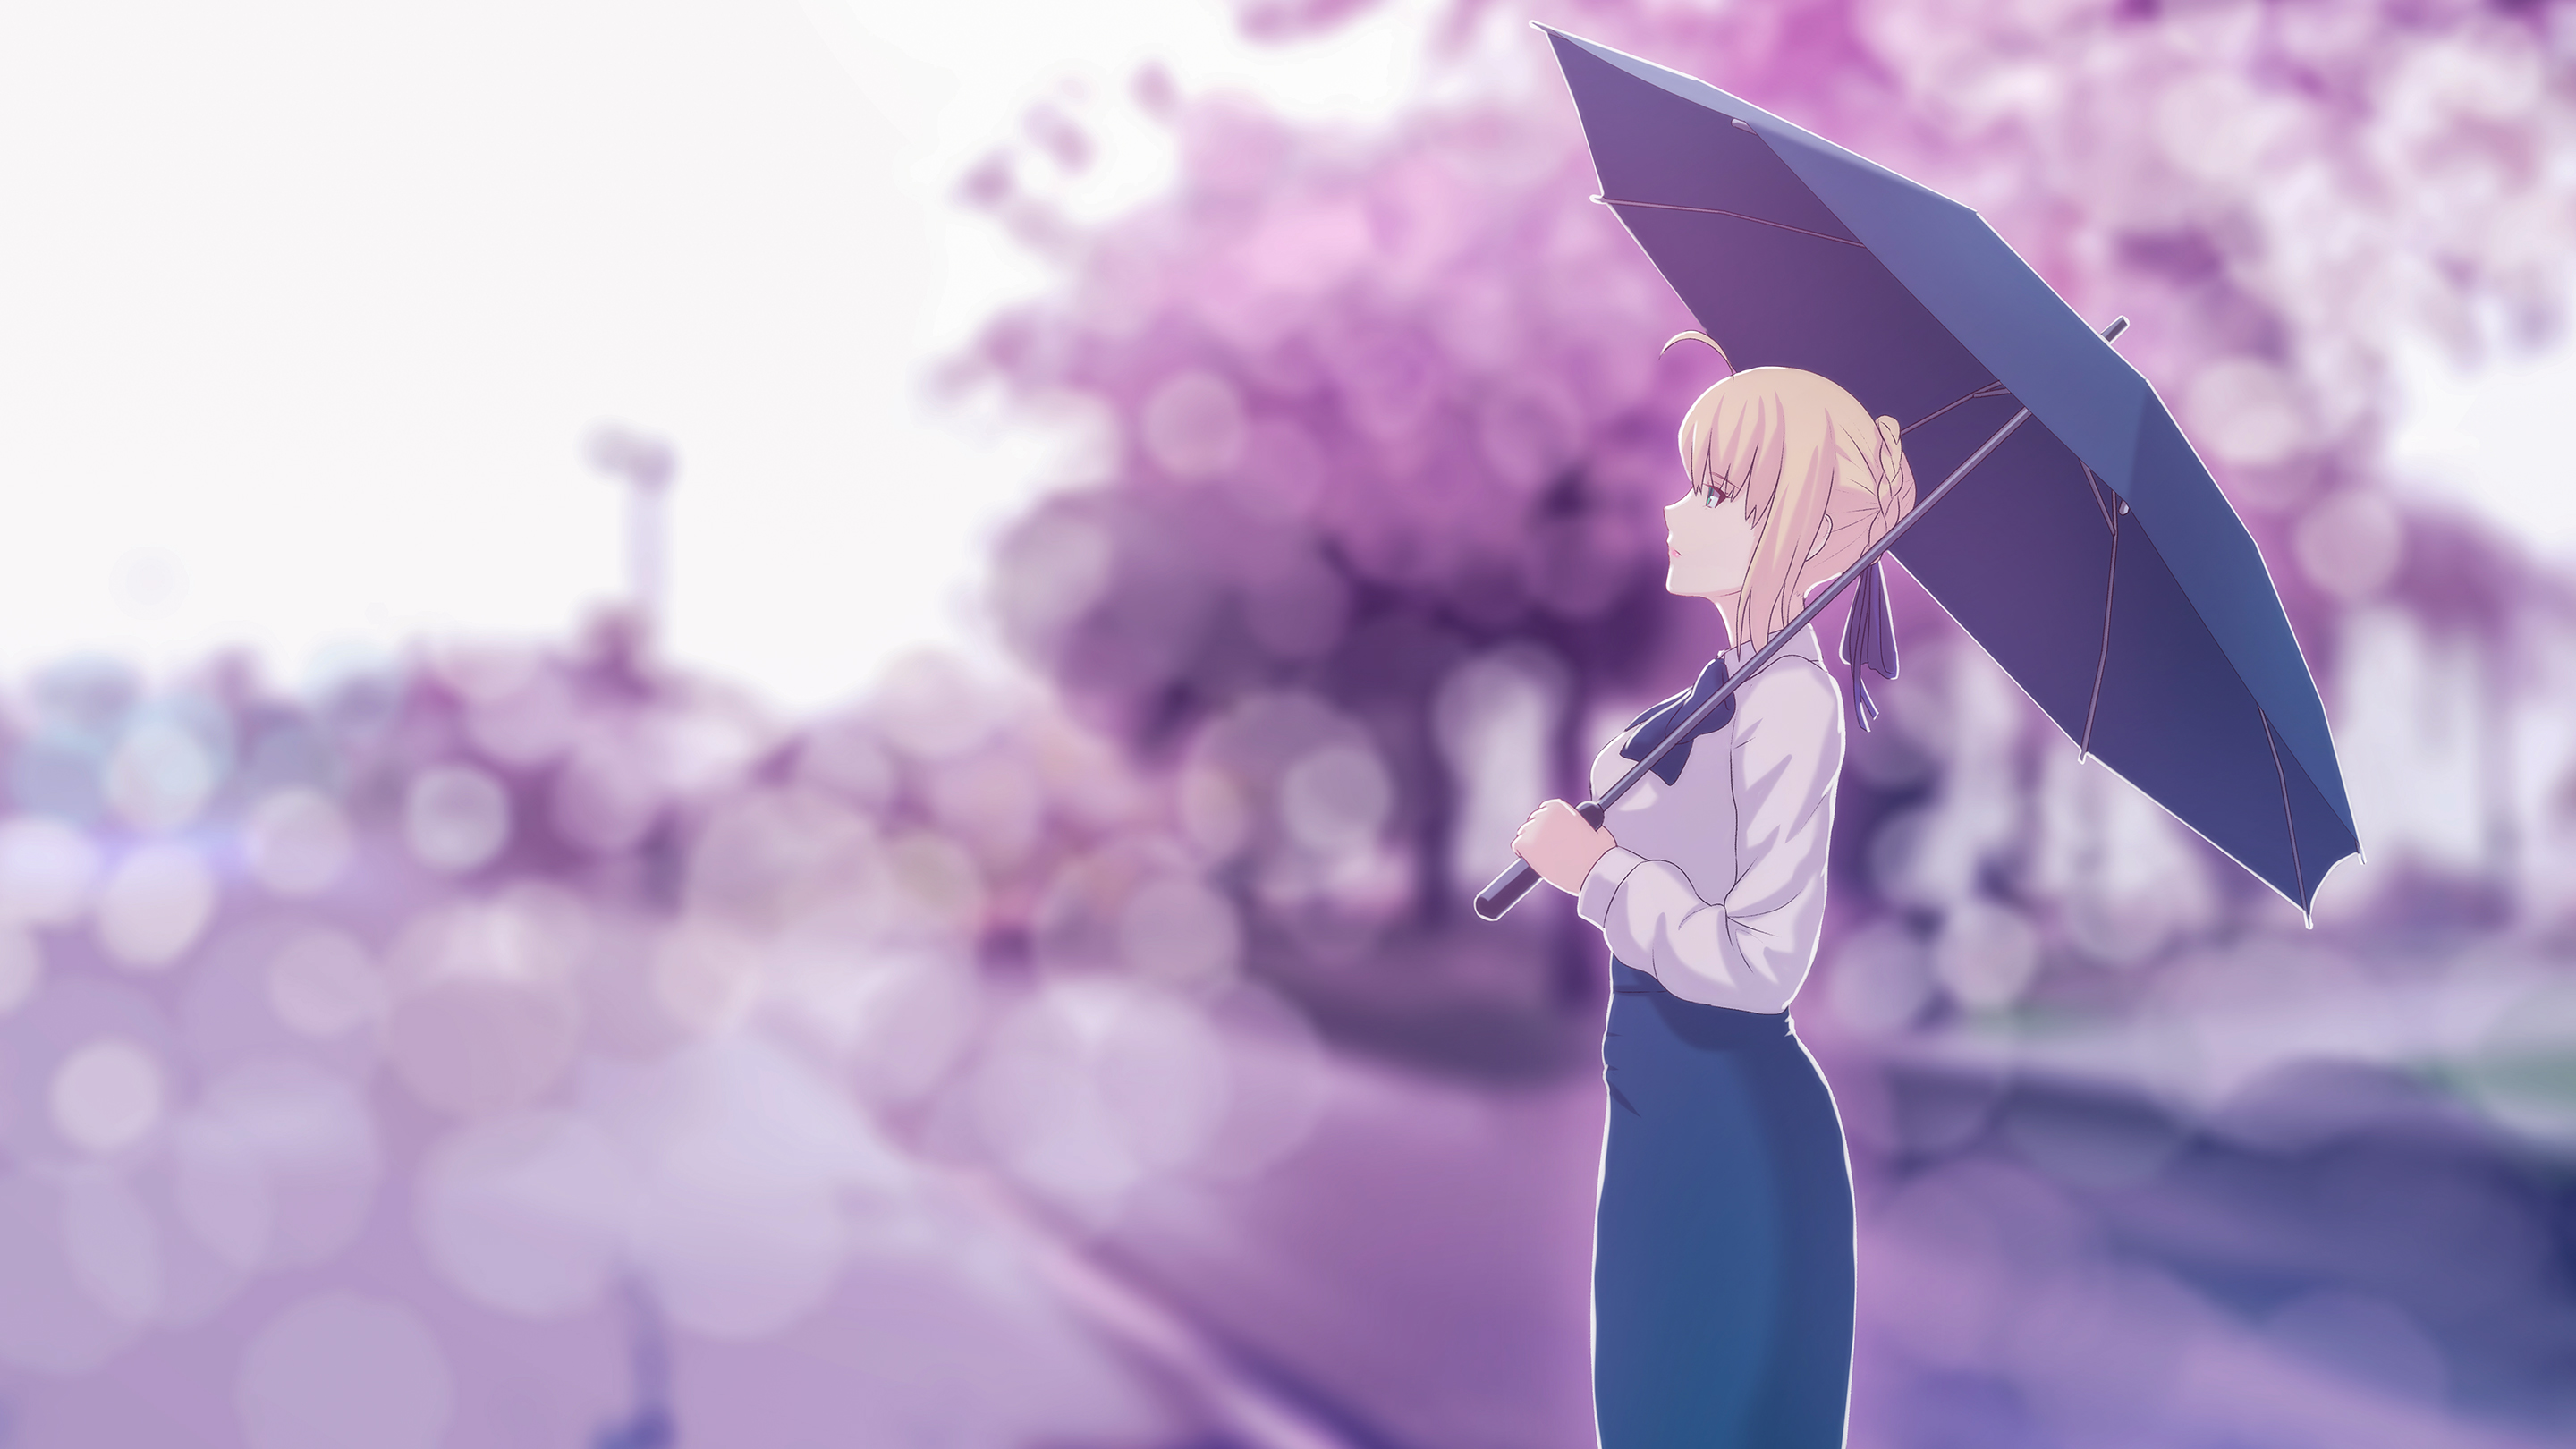 Saber fate stay night 7009542